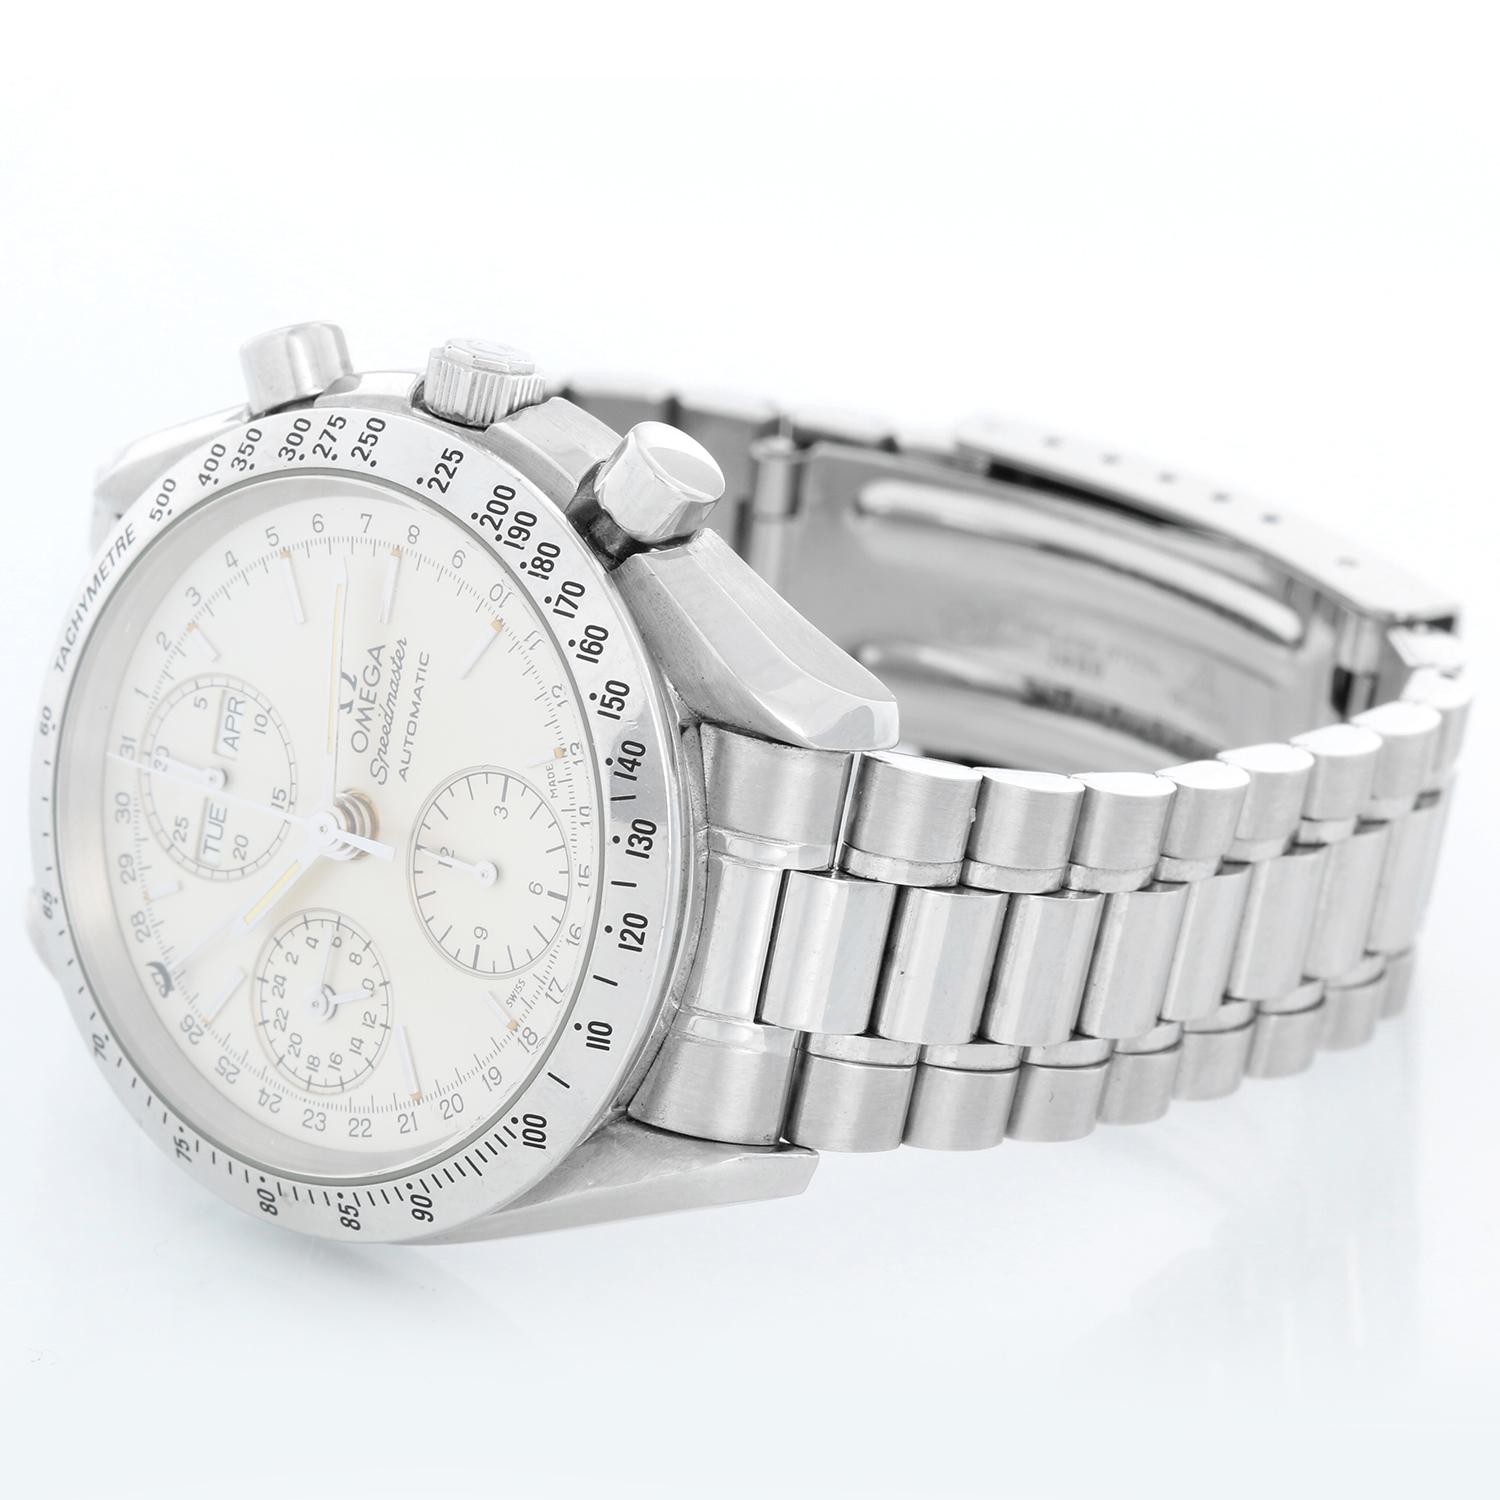 Omega Speedmaster Chronograph Men's Watch Day/Date 3521.30.00 - Automatic; chronograph. Stainless steel ( 39 mm ). Silver dial with stick hour markers; date at 3 o'clock. Three subdials. Brushed stainless steel bracelet with deployant clasp. Fits